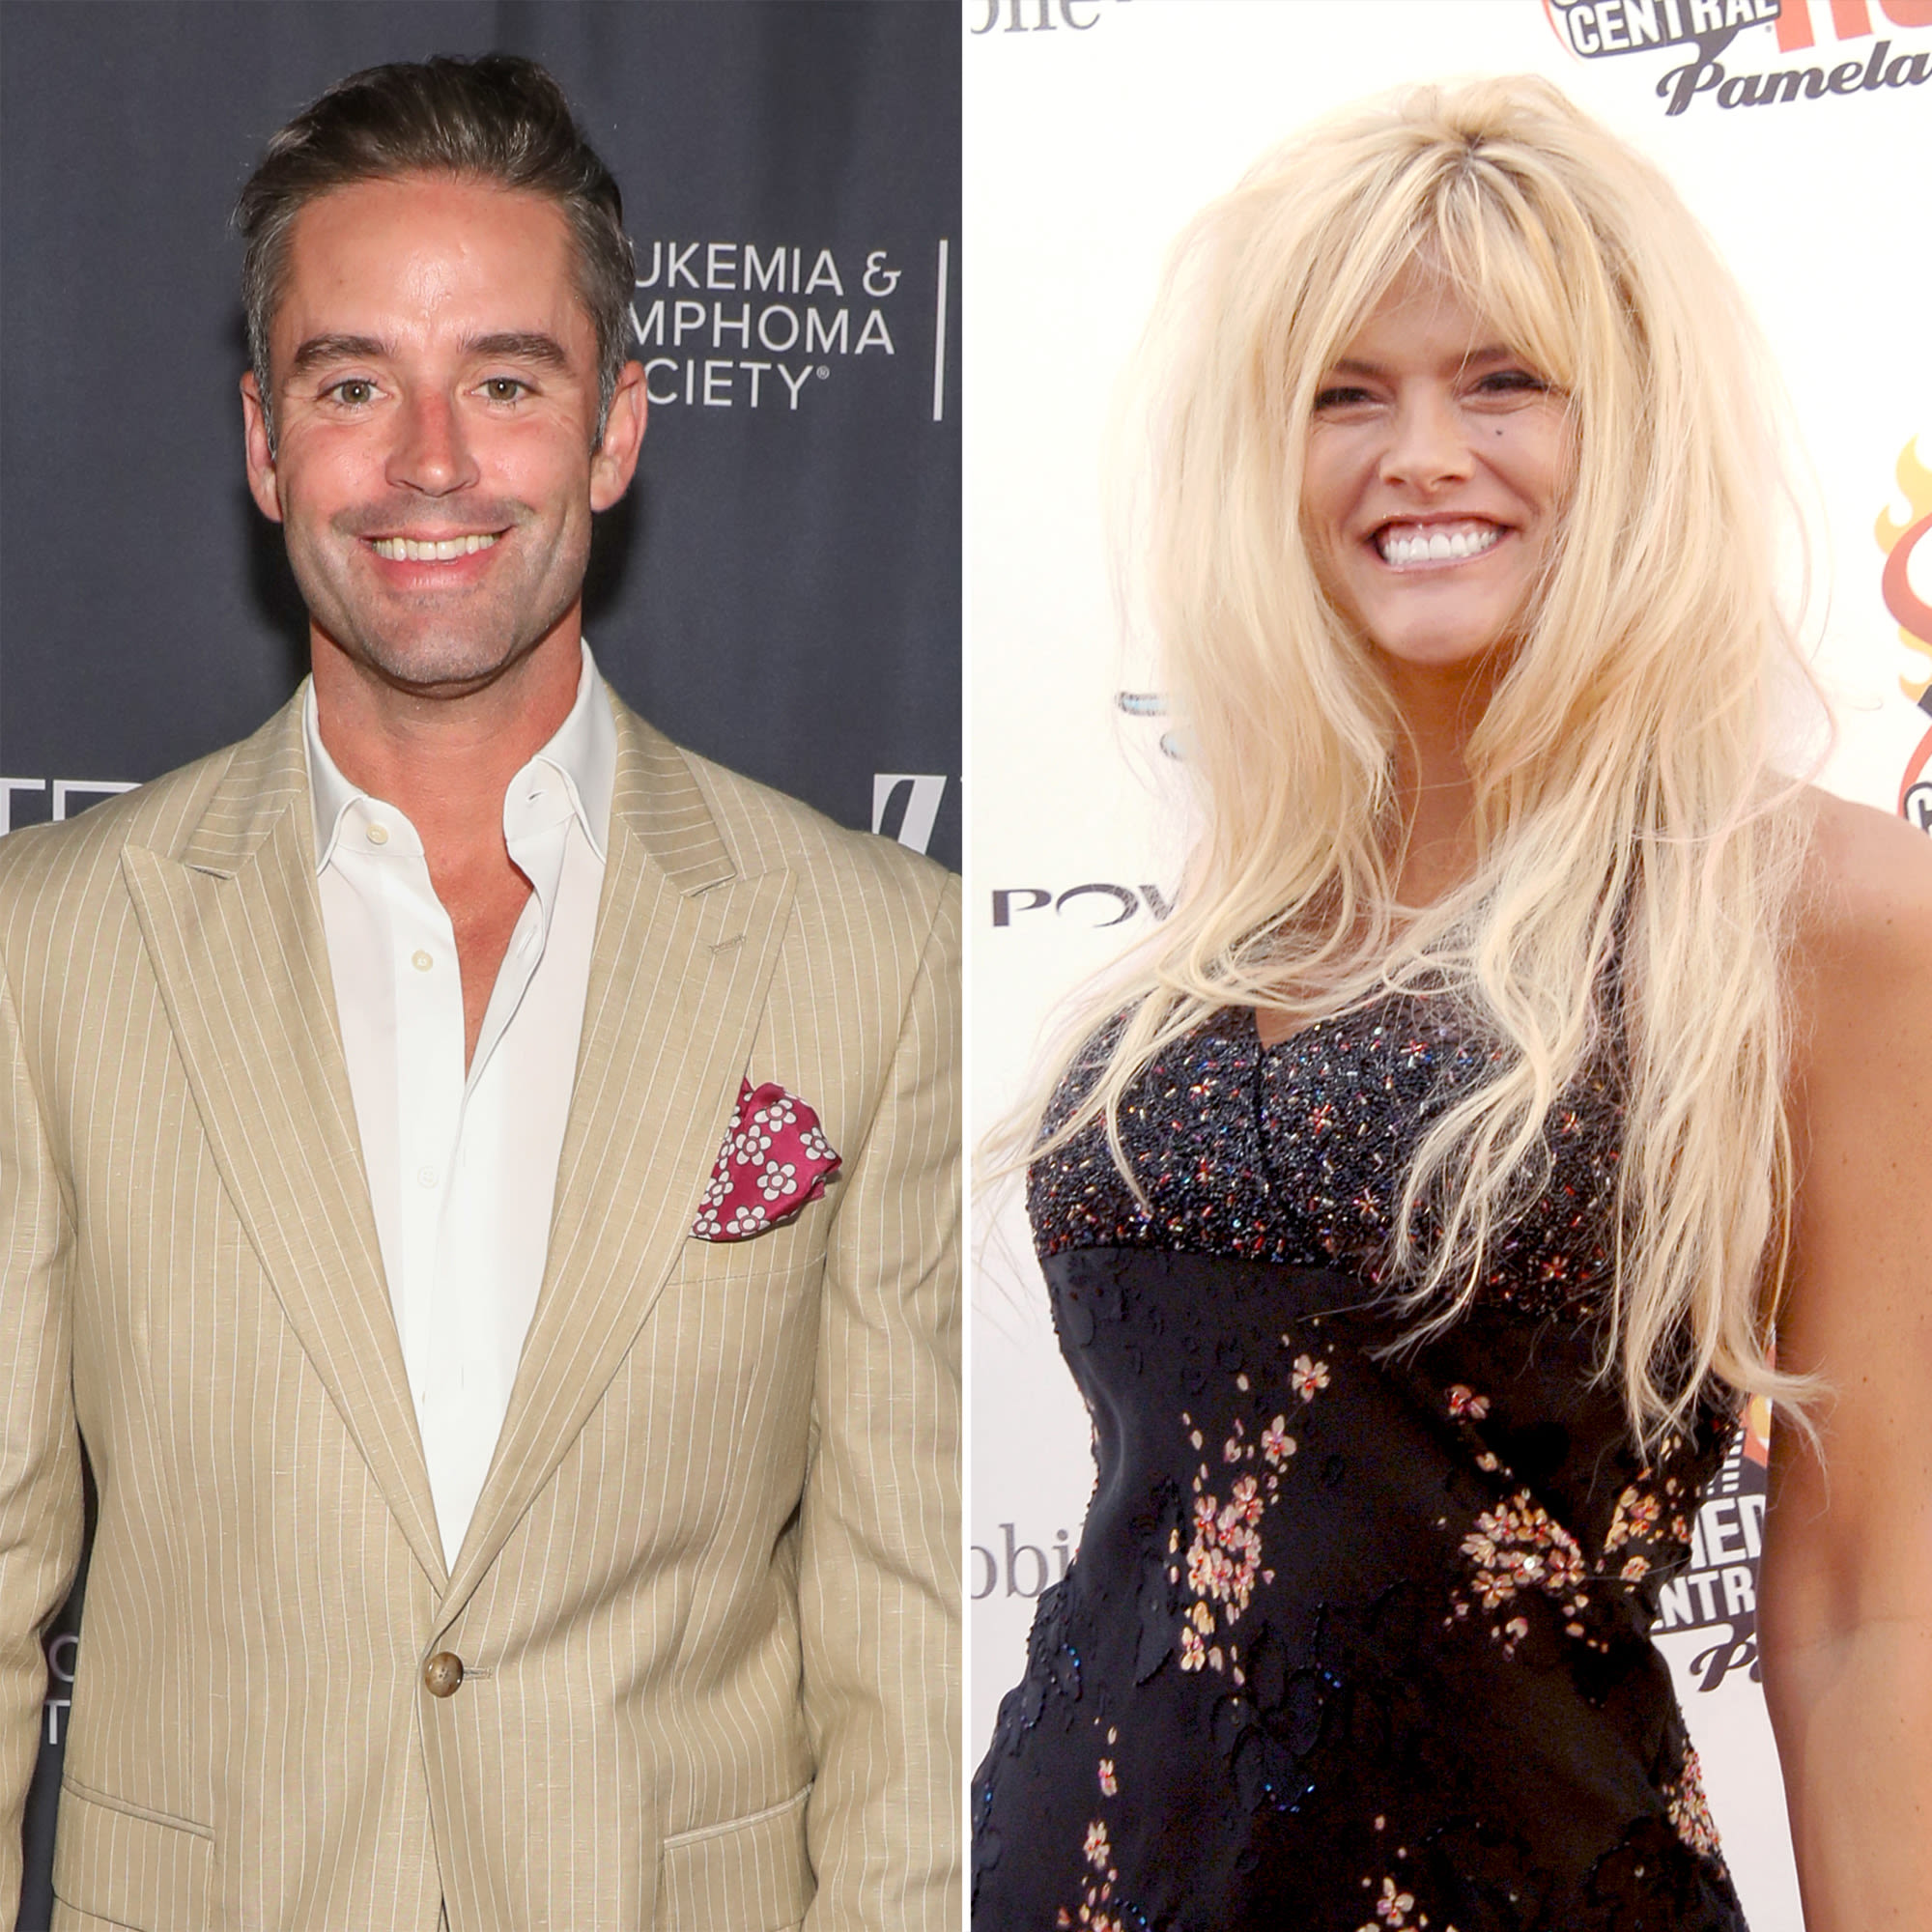 The Valley’s Jesse Lally Reveals He Had a Fling With Anna Nicole Smith ‘For a Year or 2’